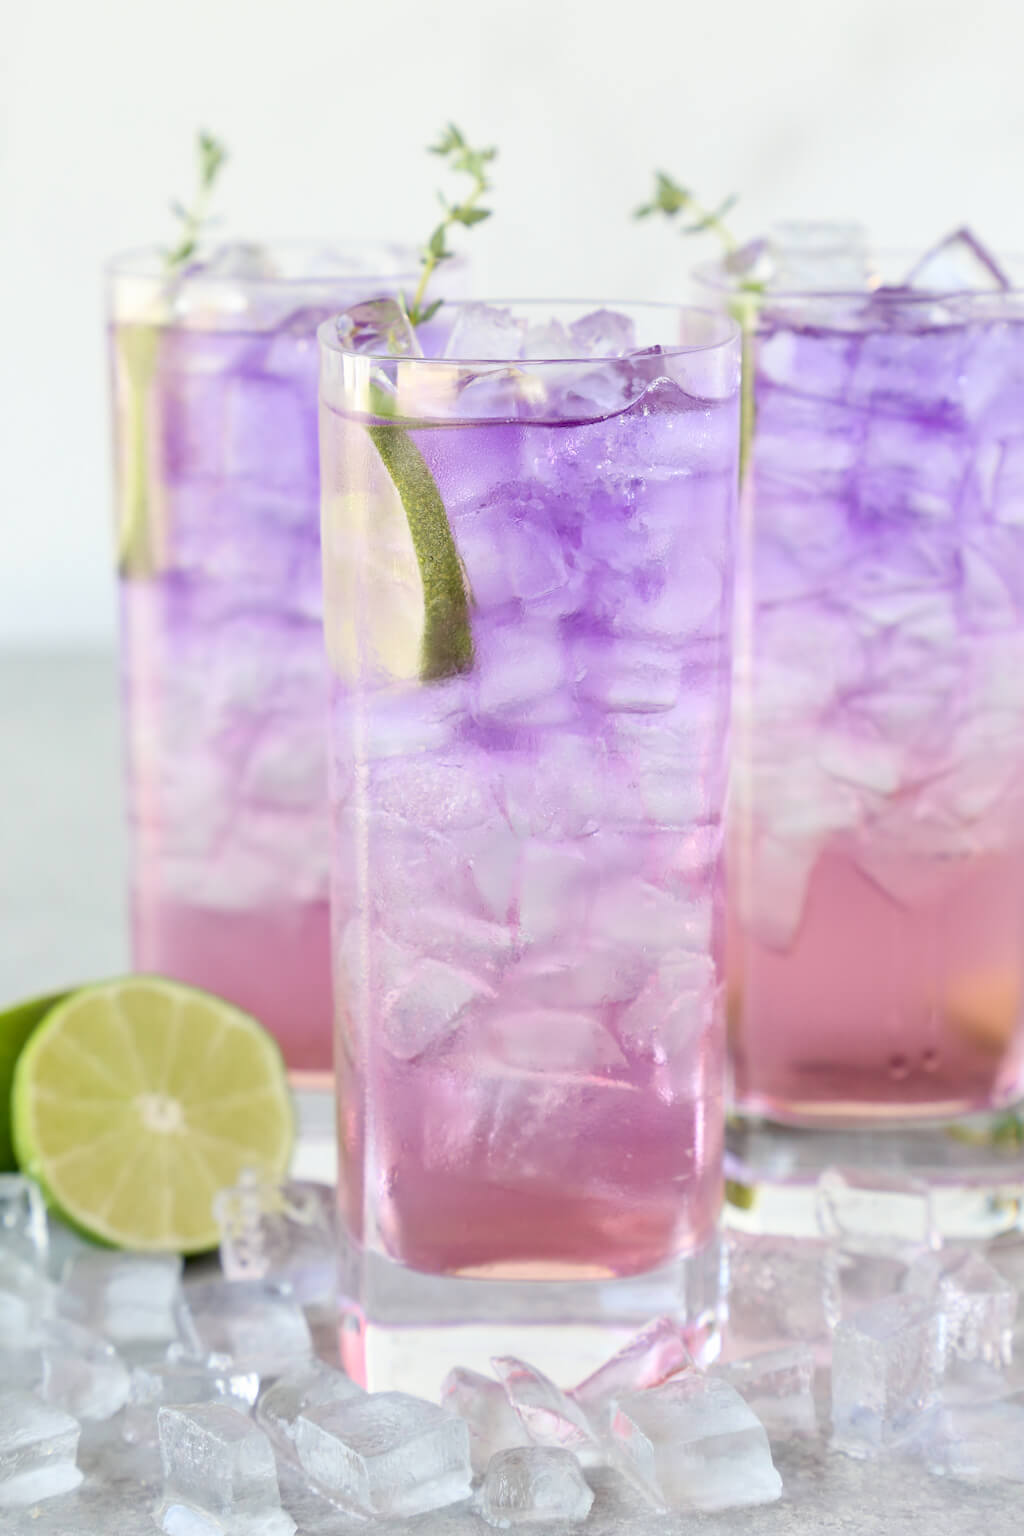 three glasses filled with ice and a purple and pink drink